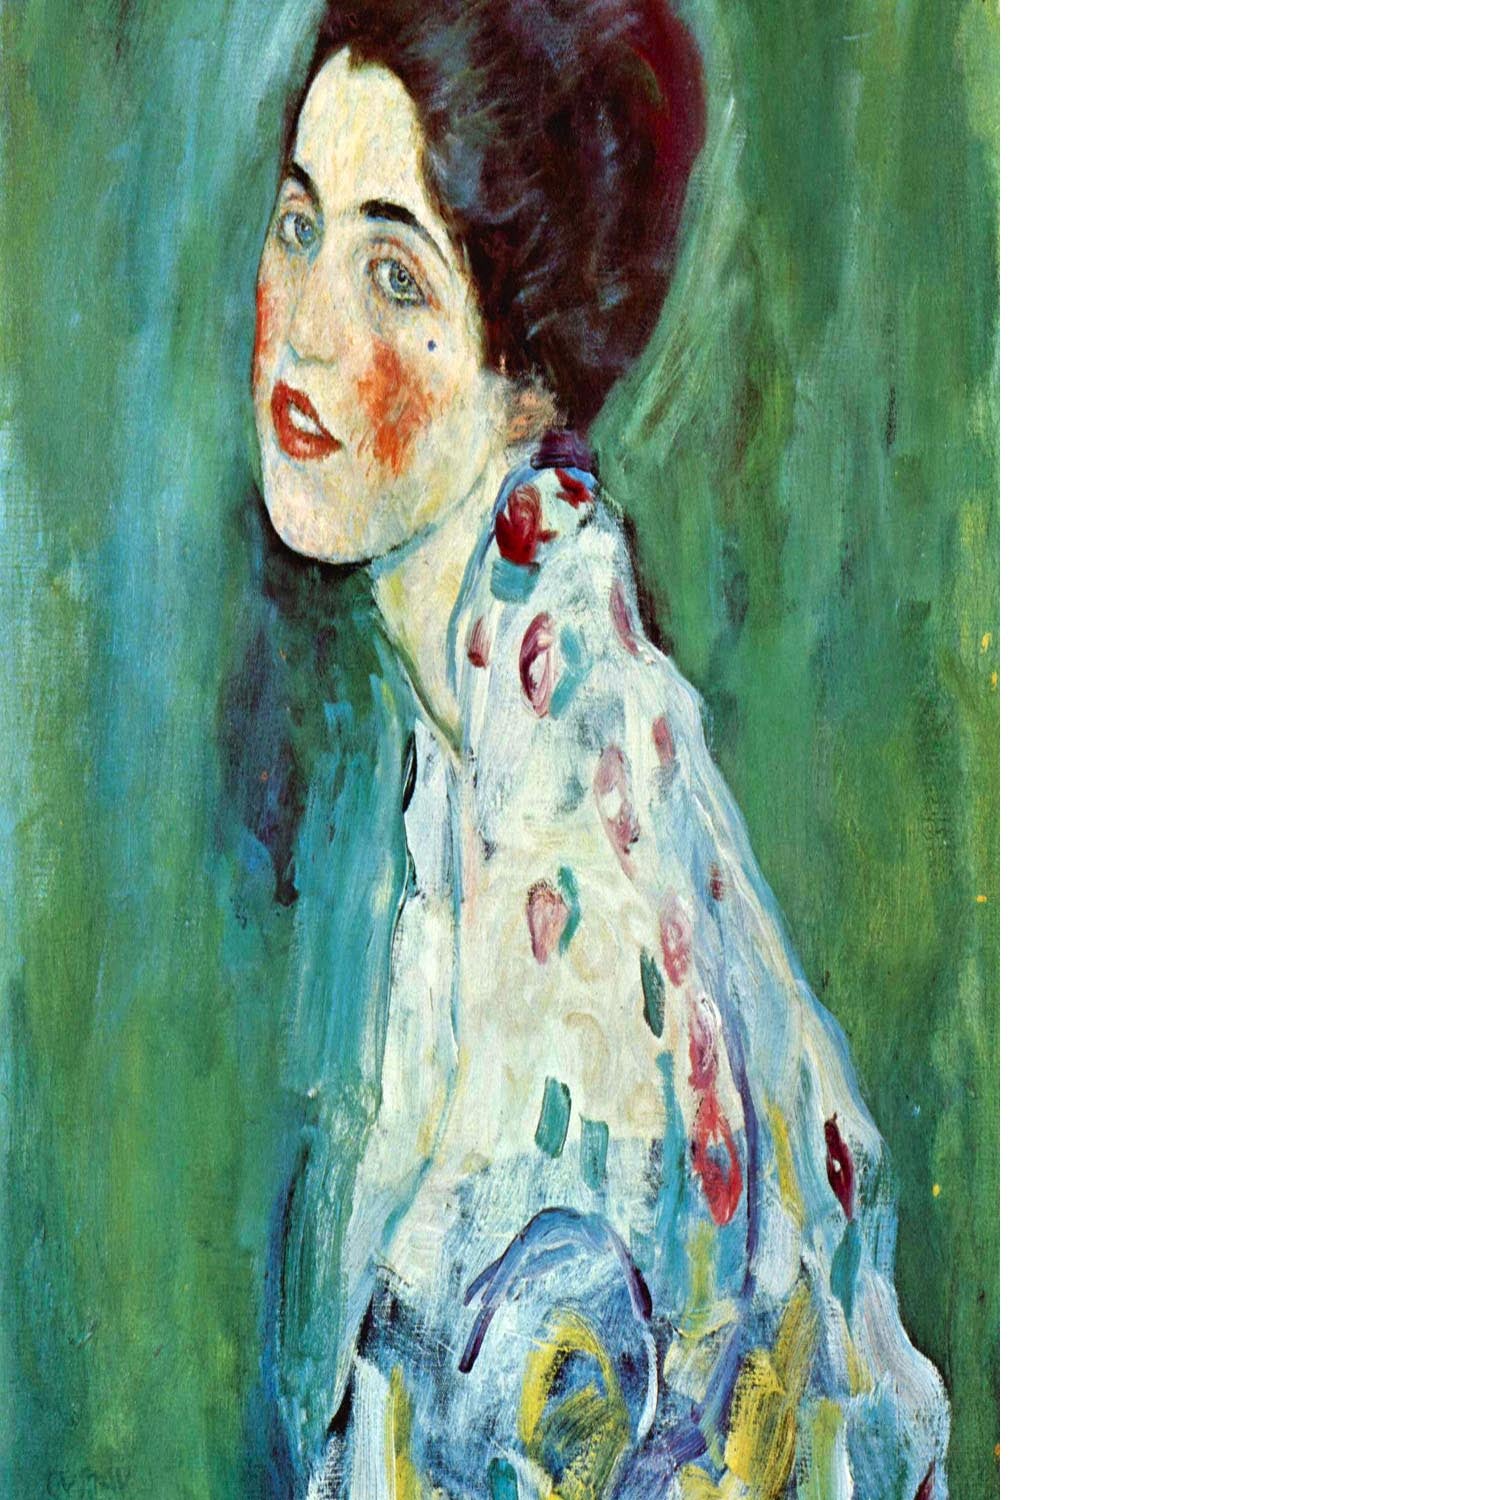 Portrait of a Lady by Klimt Floating Framed Canvas